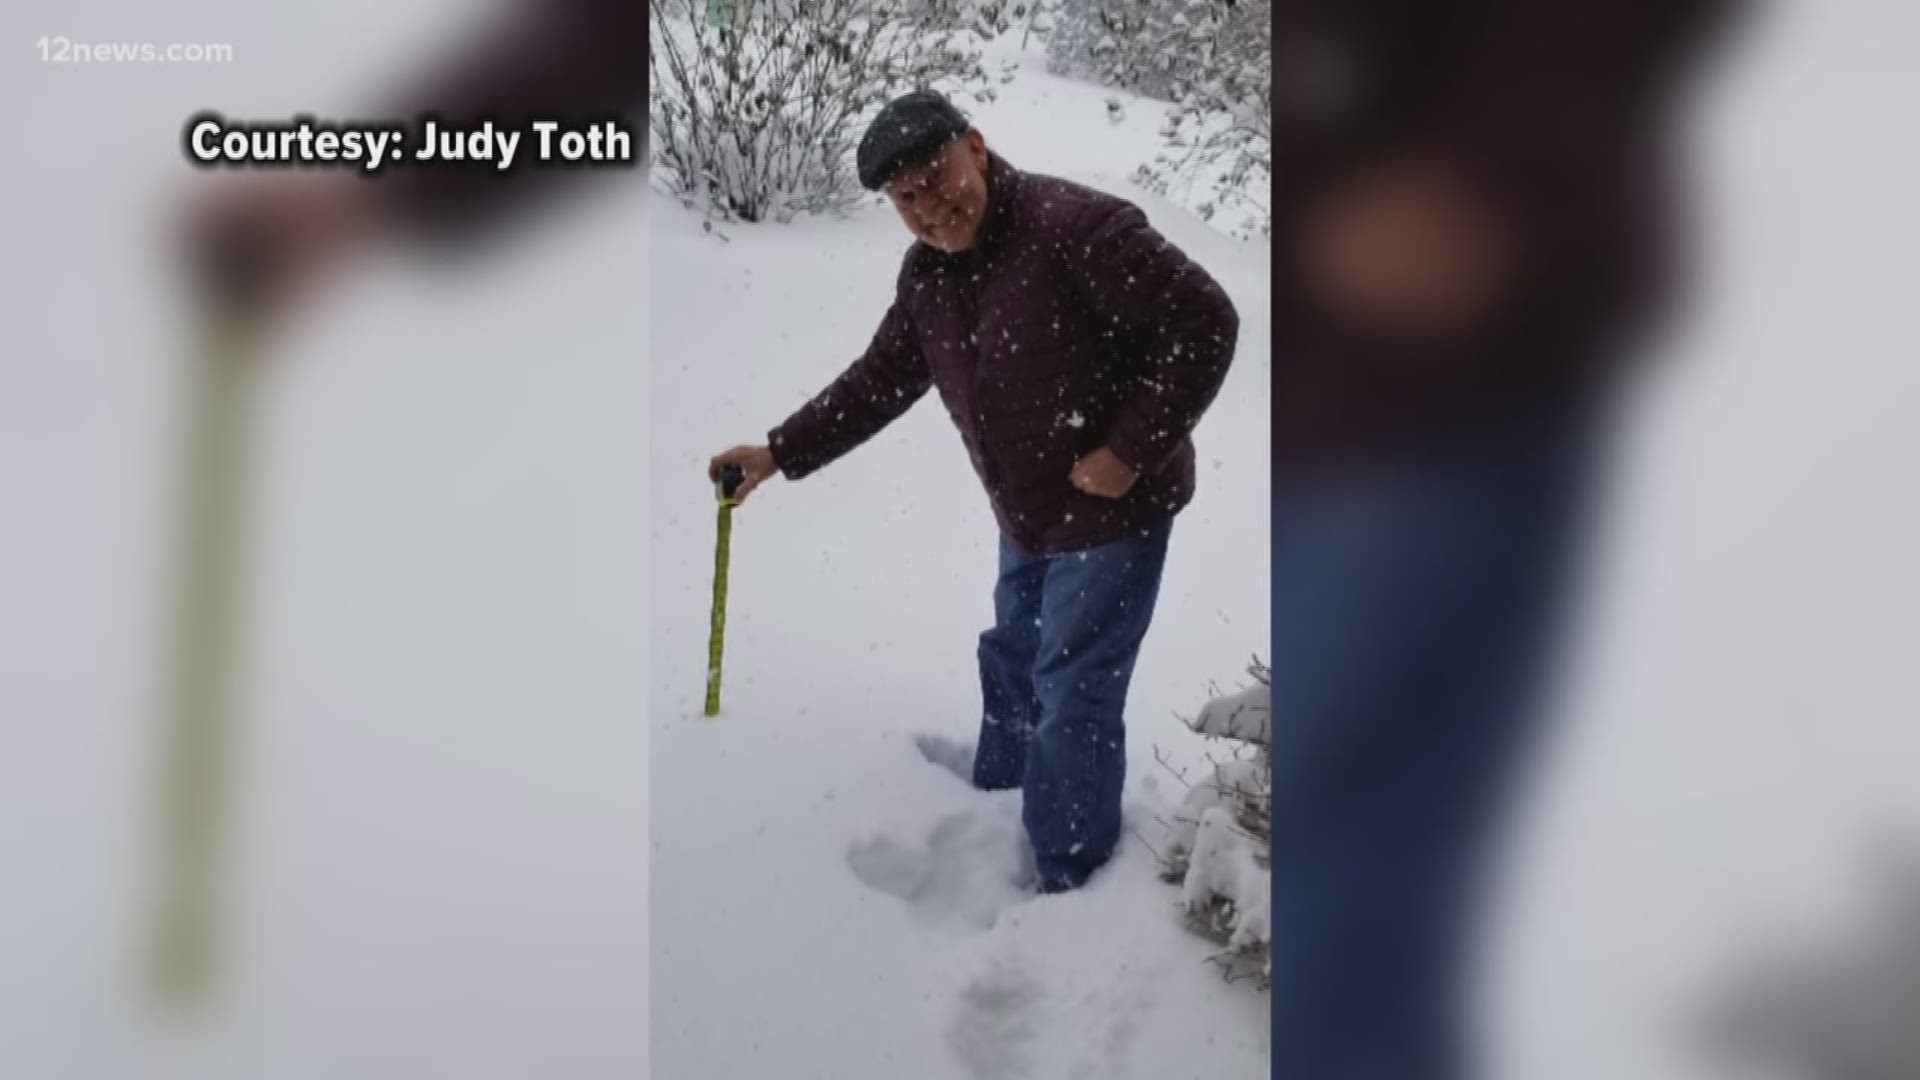 The mayor of Prescott has declared a state of emergency as the town is expected to get hit by two feet of snow. Not everyone is complaining though, a lot of people are enjoying it!